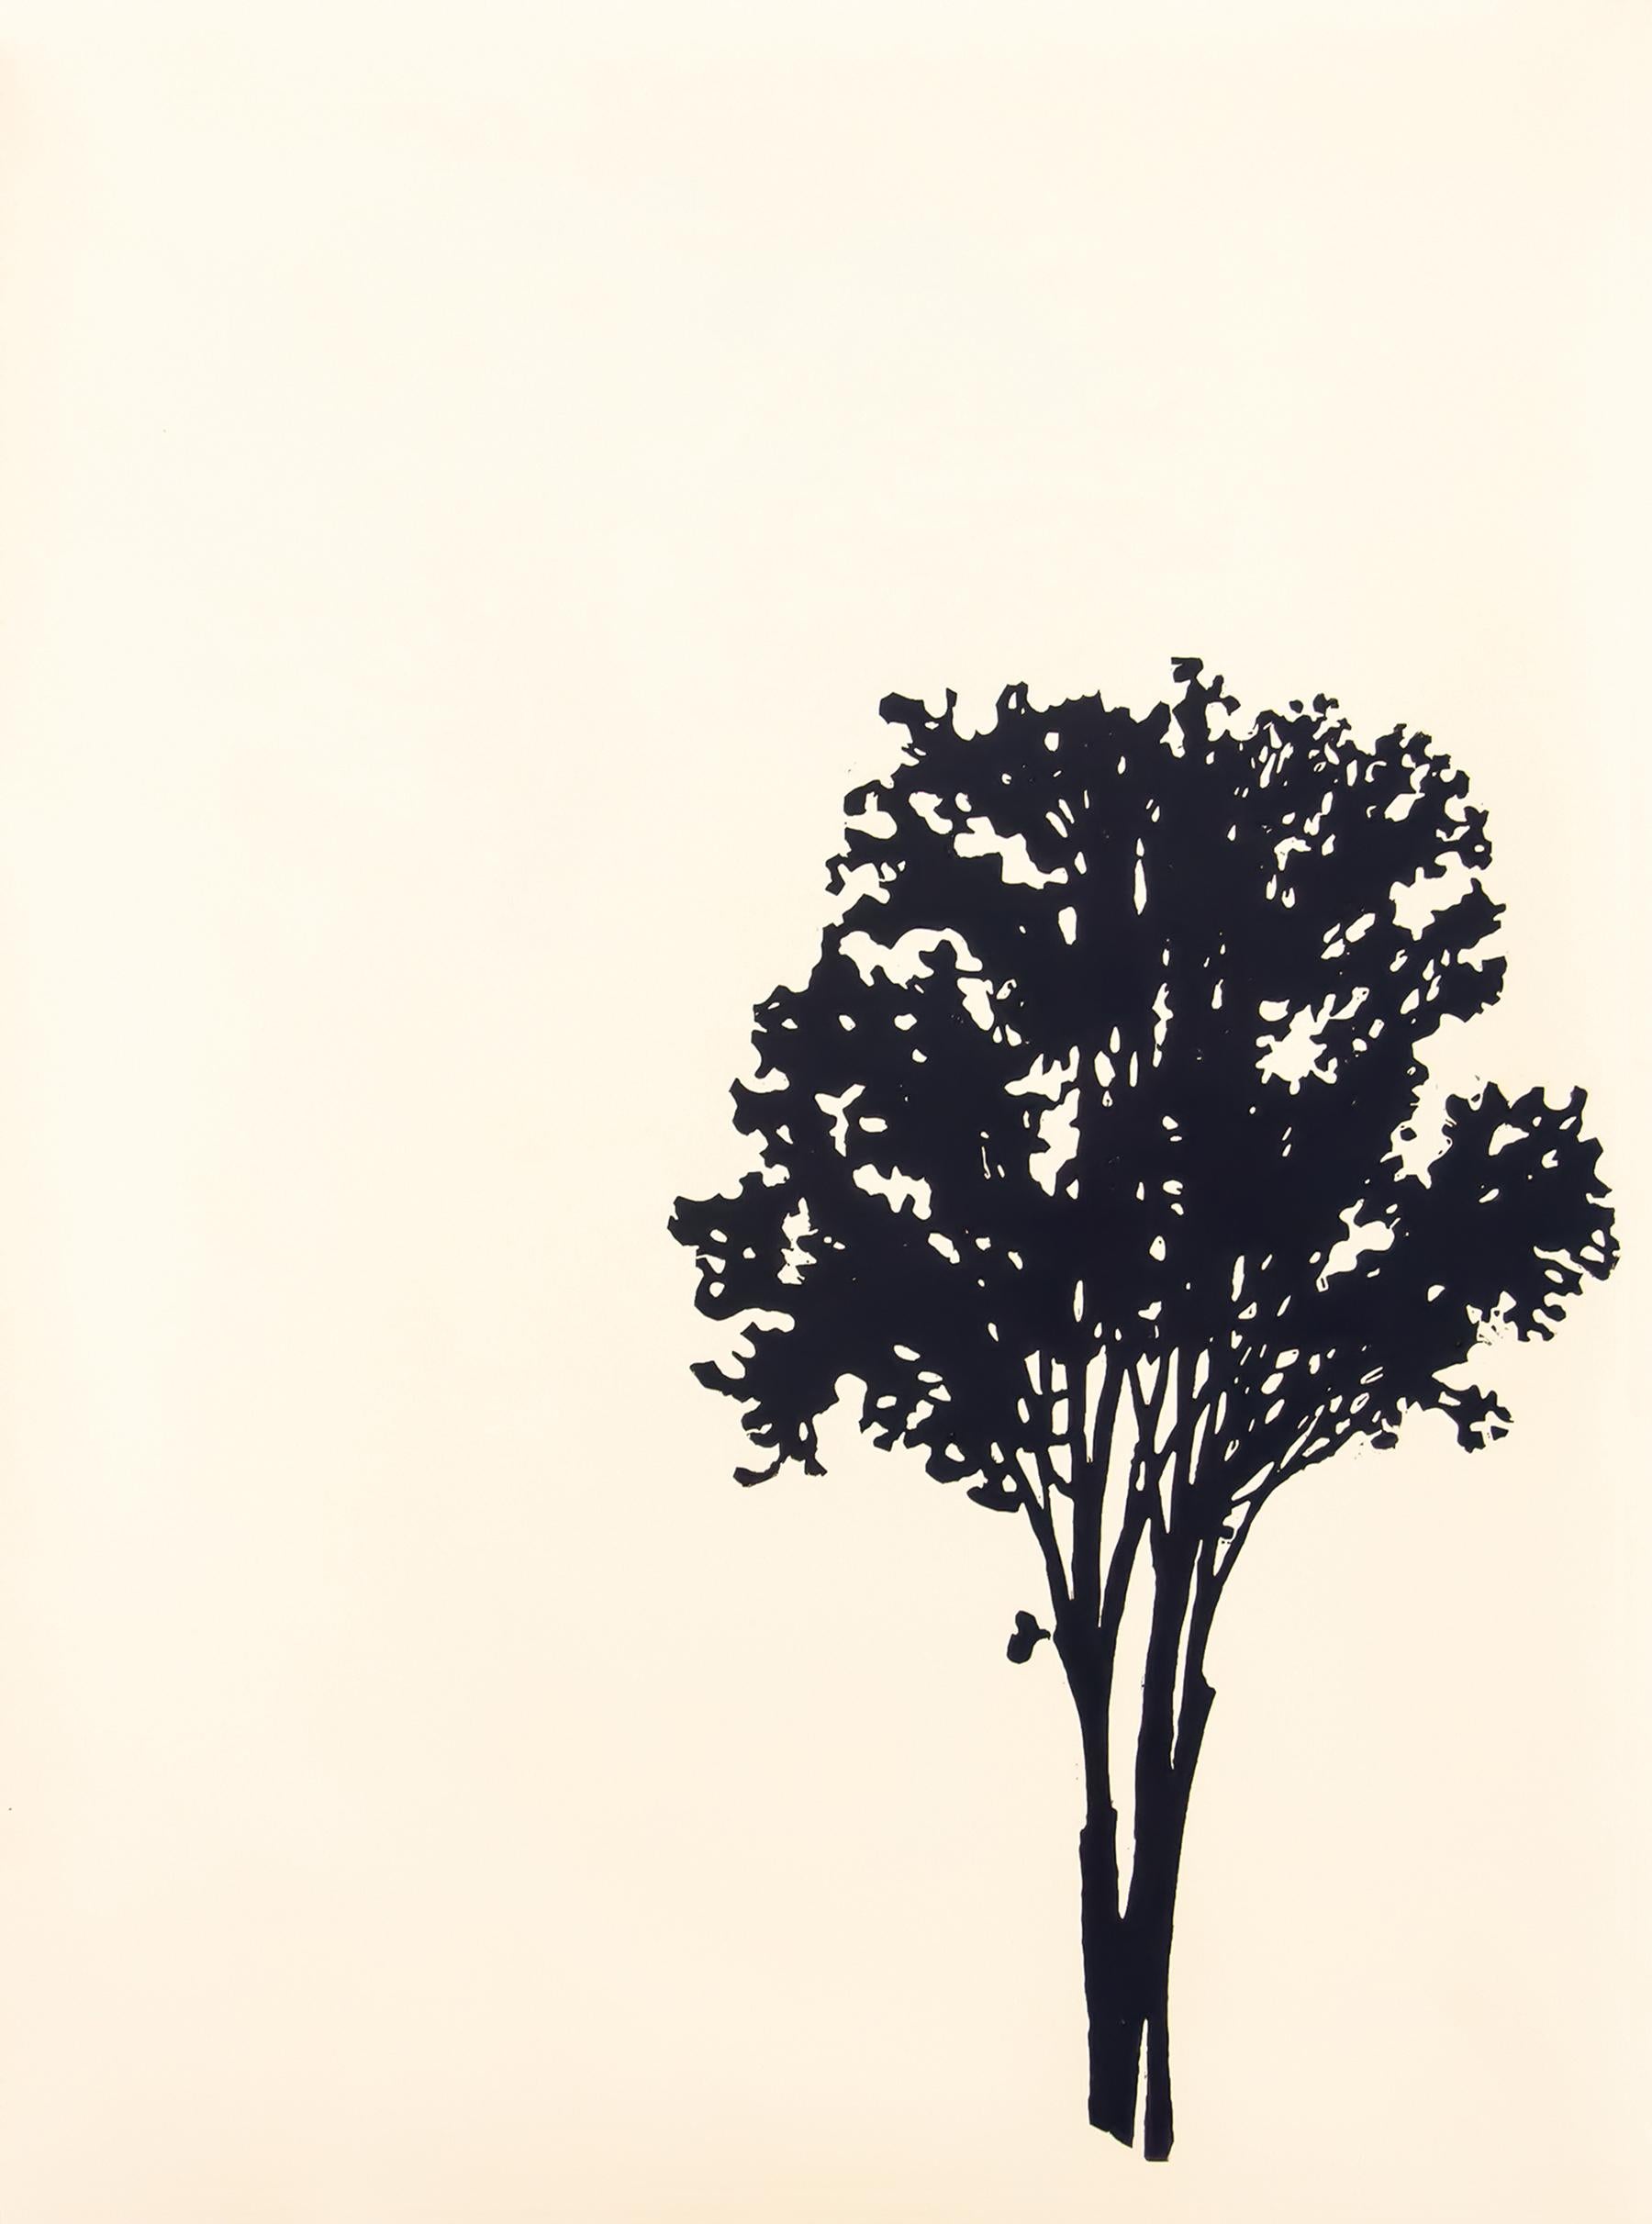 Der Wald (portfolio of 9) 1 of 12 -  grouping, woodblock prints on art paper - Contemporary Print by Peter Hoffer